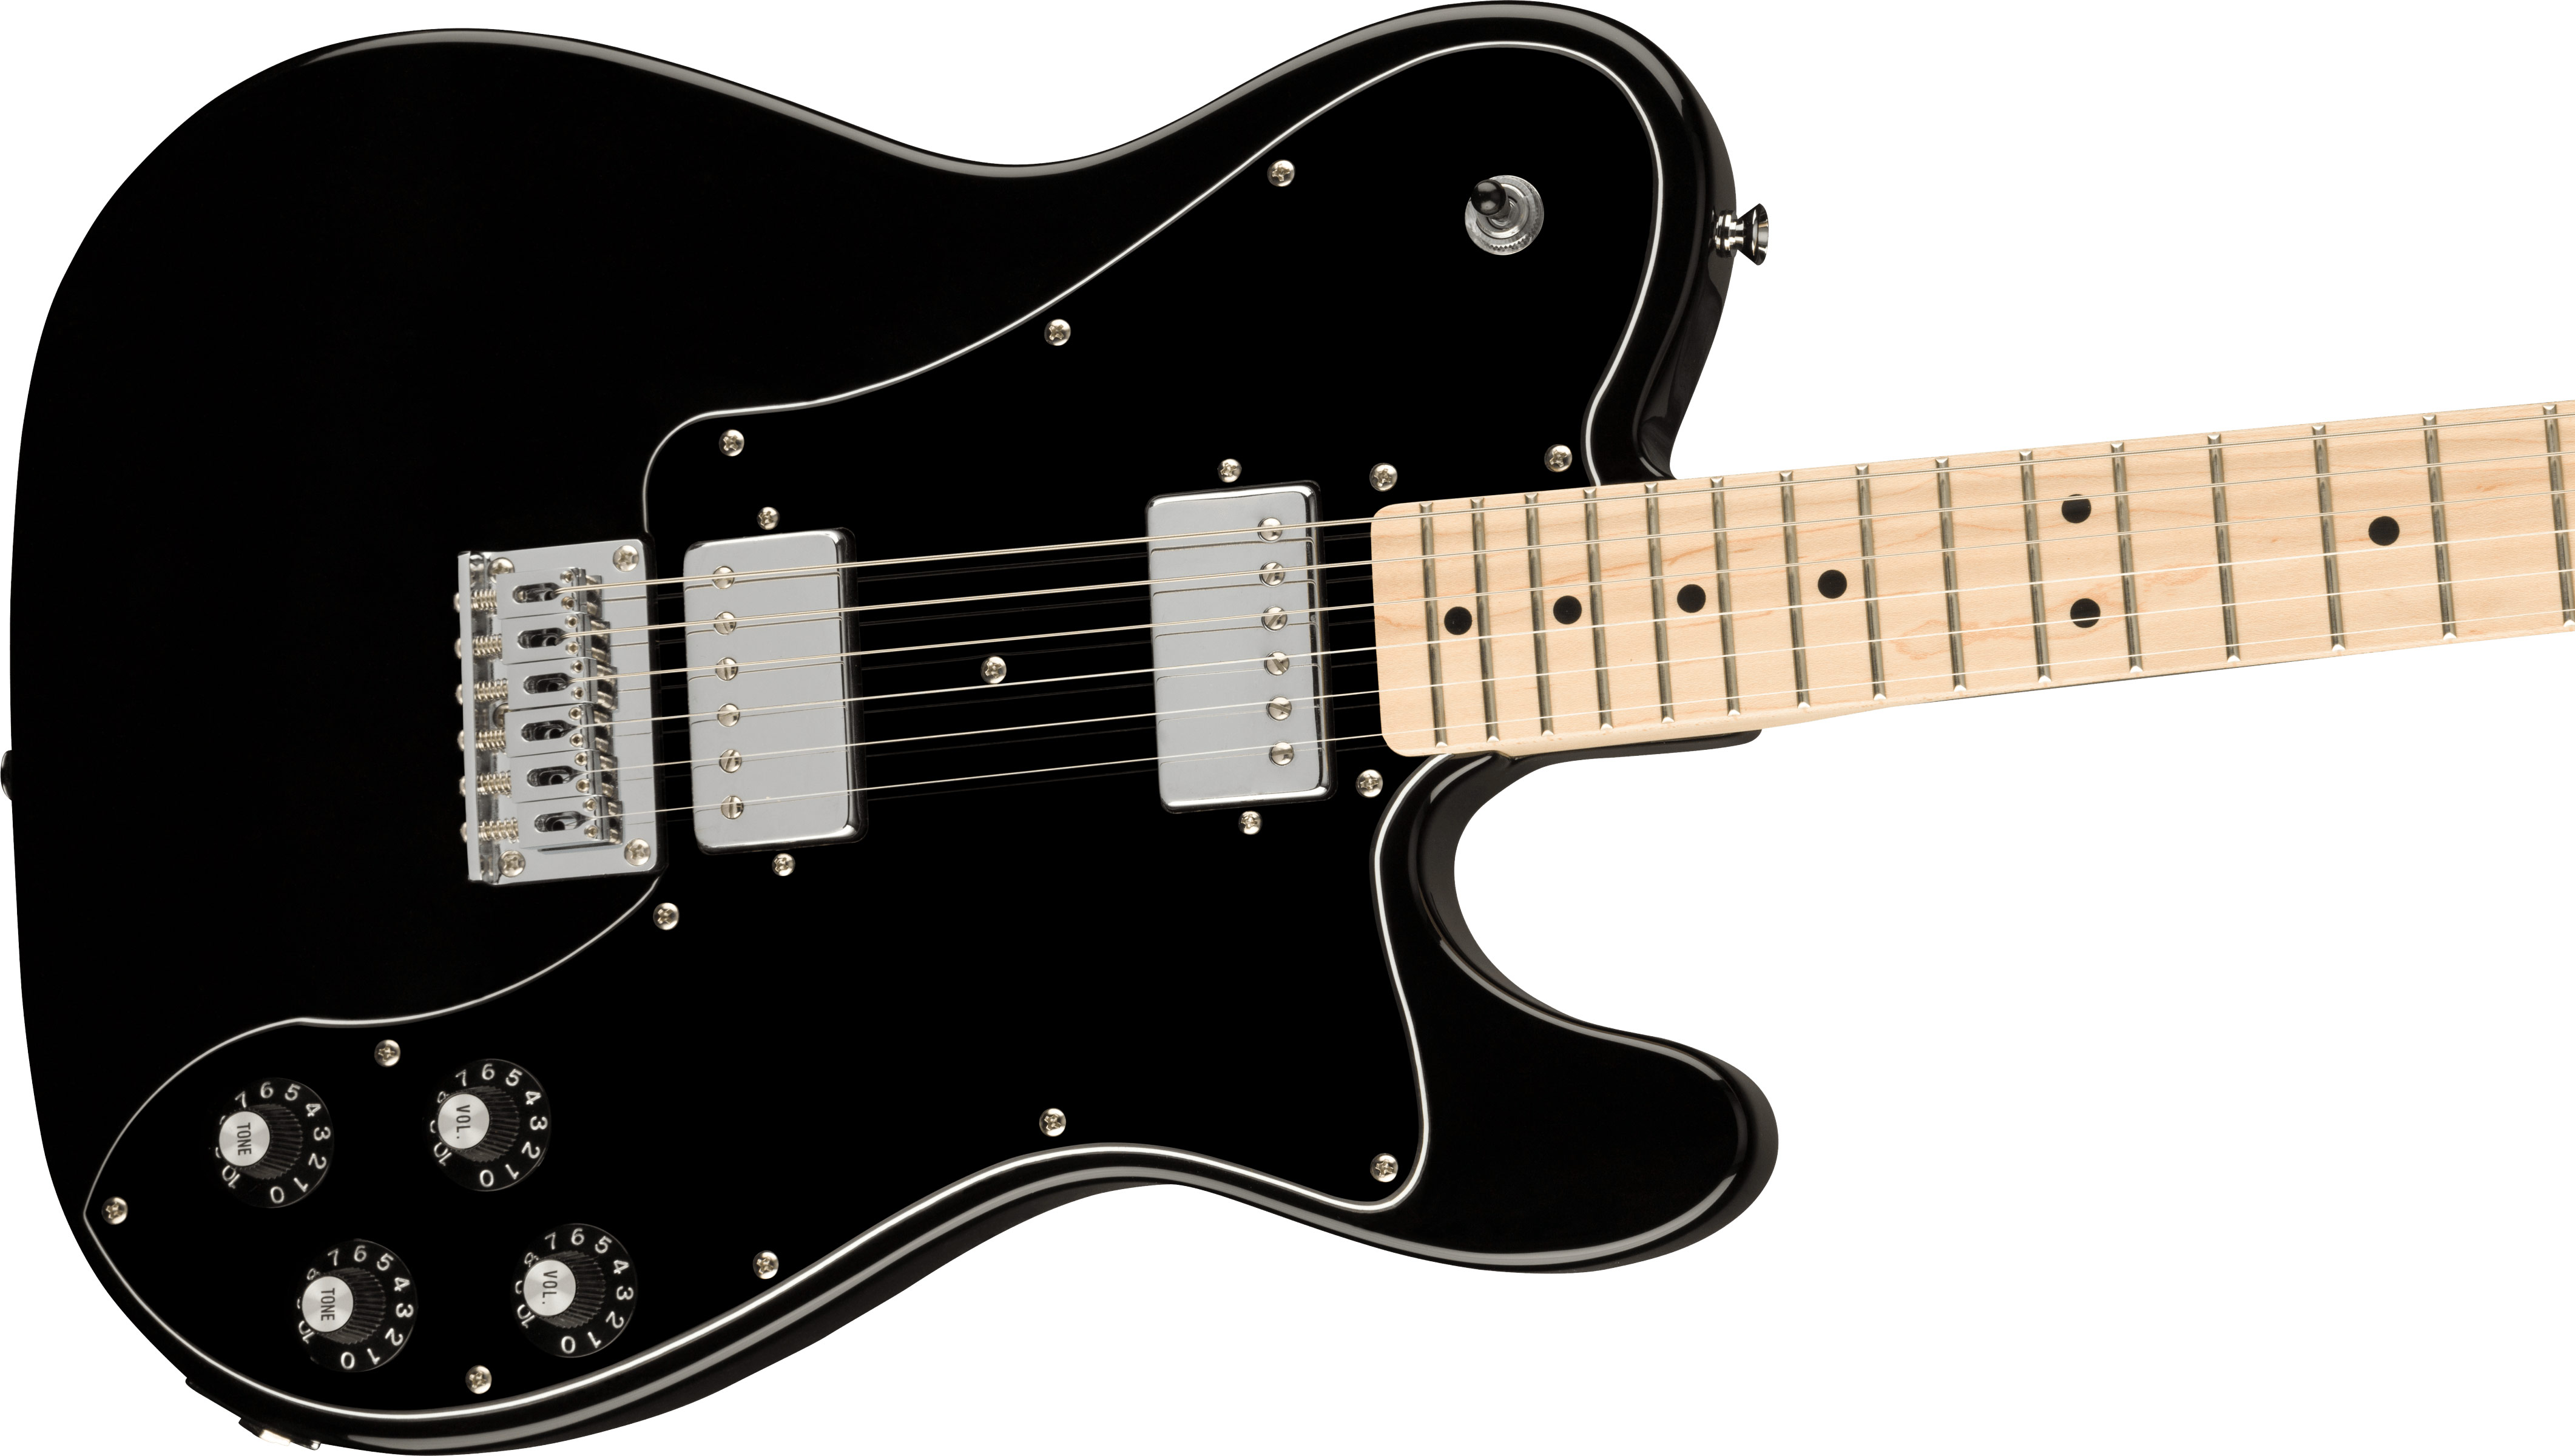 Squier Affinity Telecaster Deluxe Black Maple Fingerboard